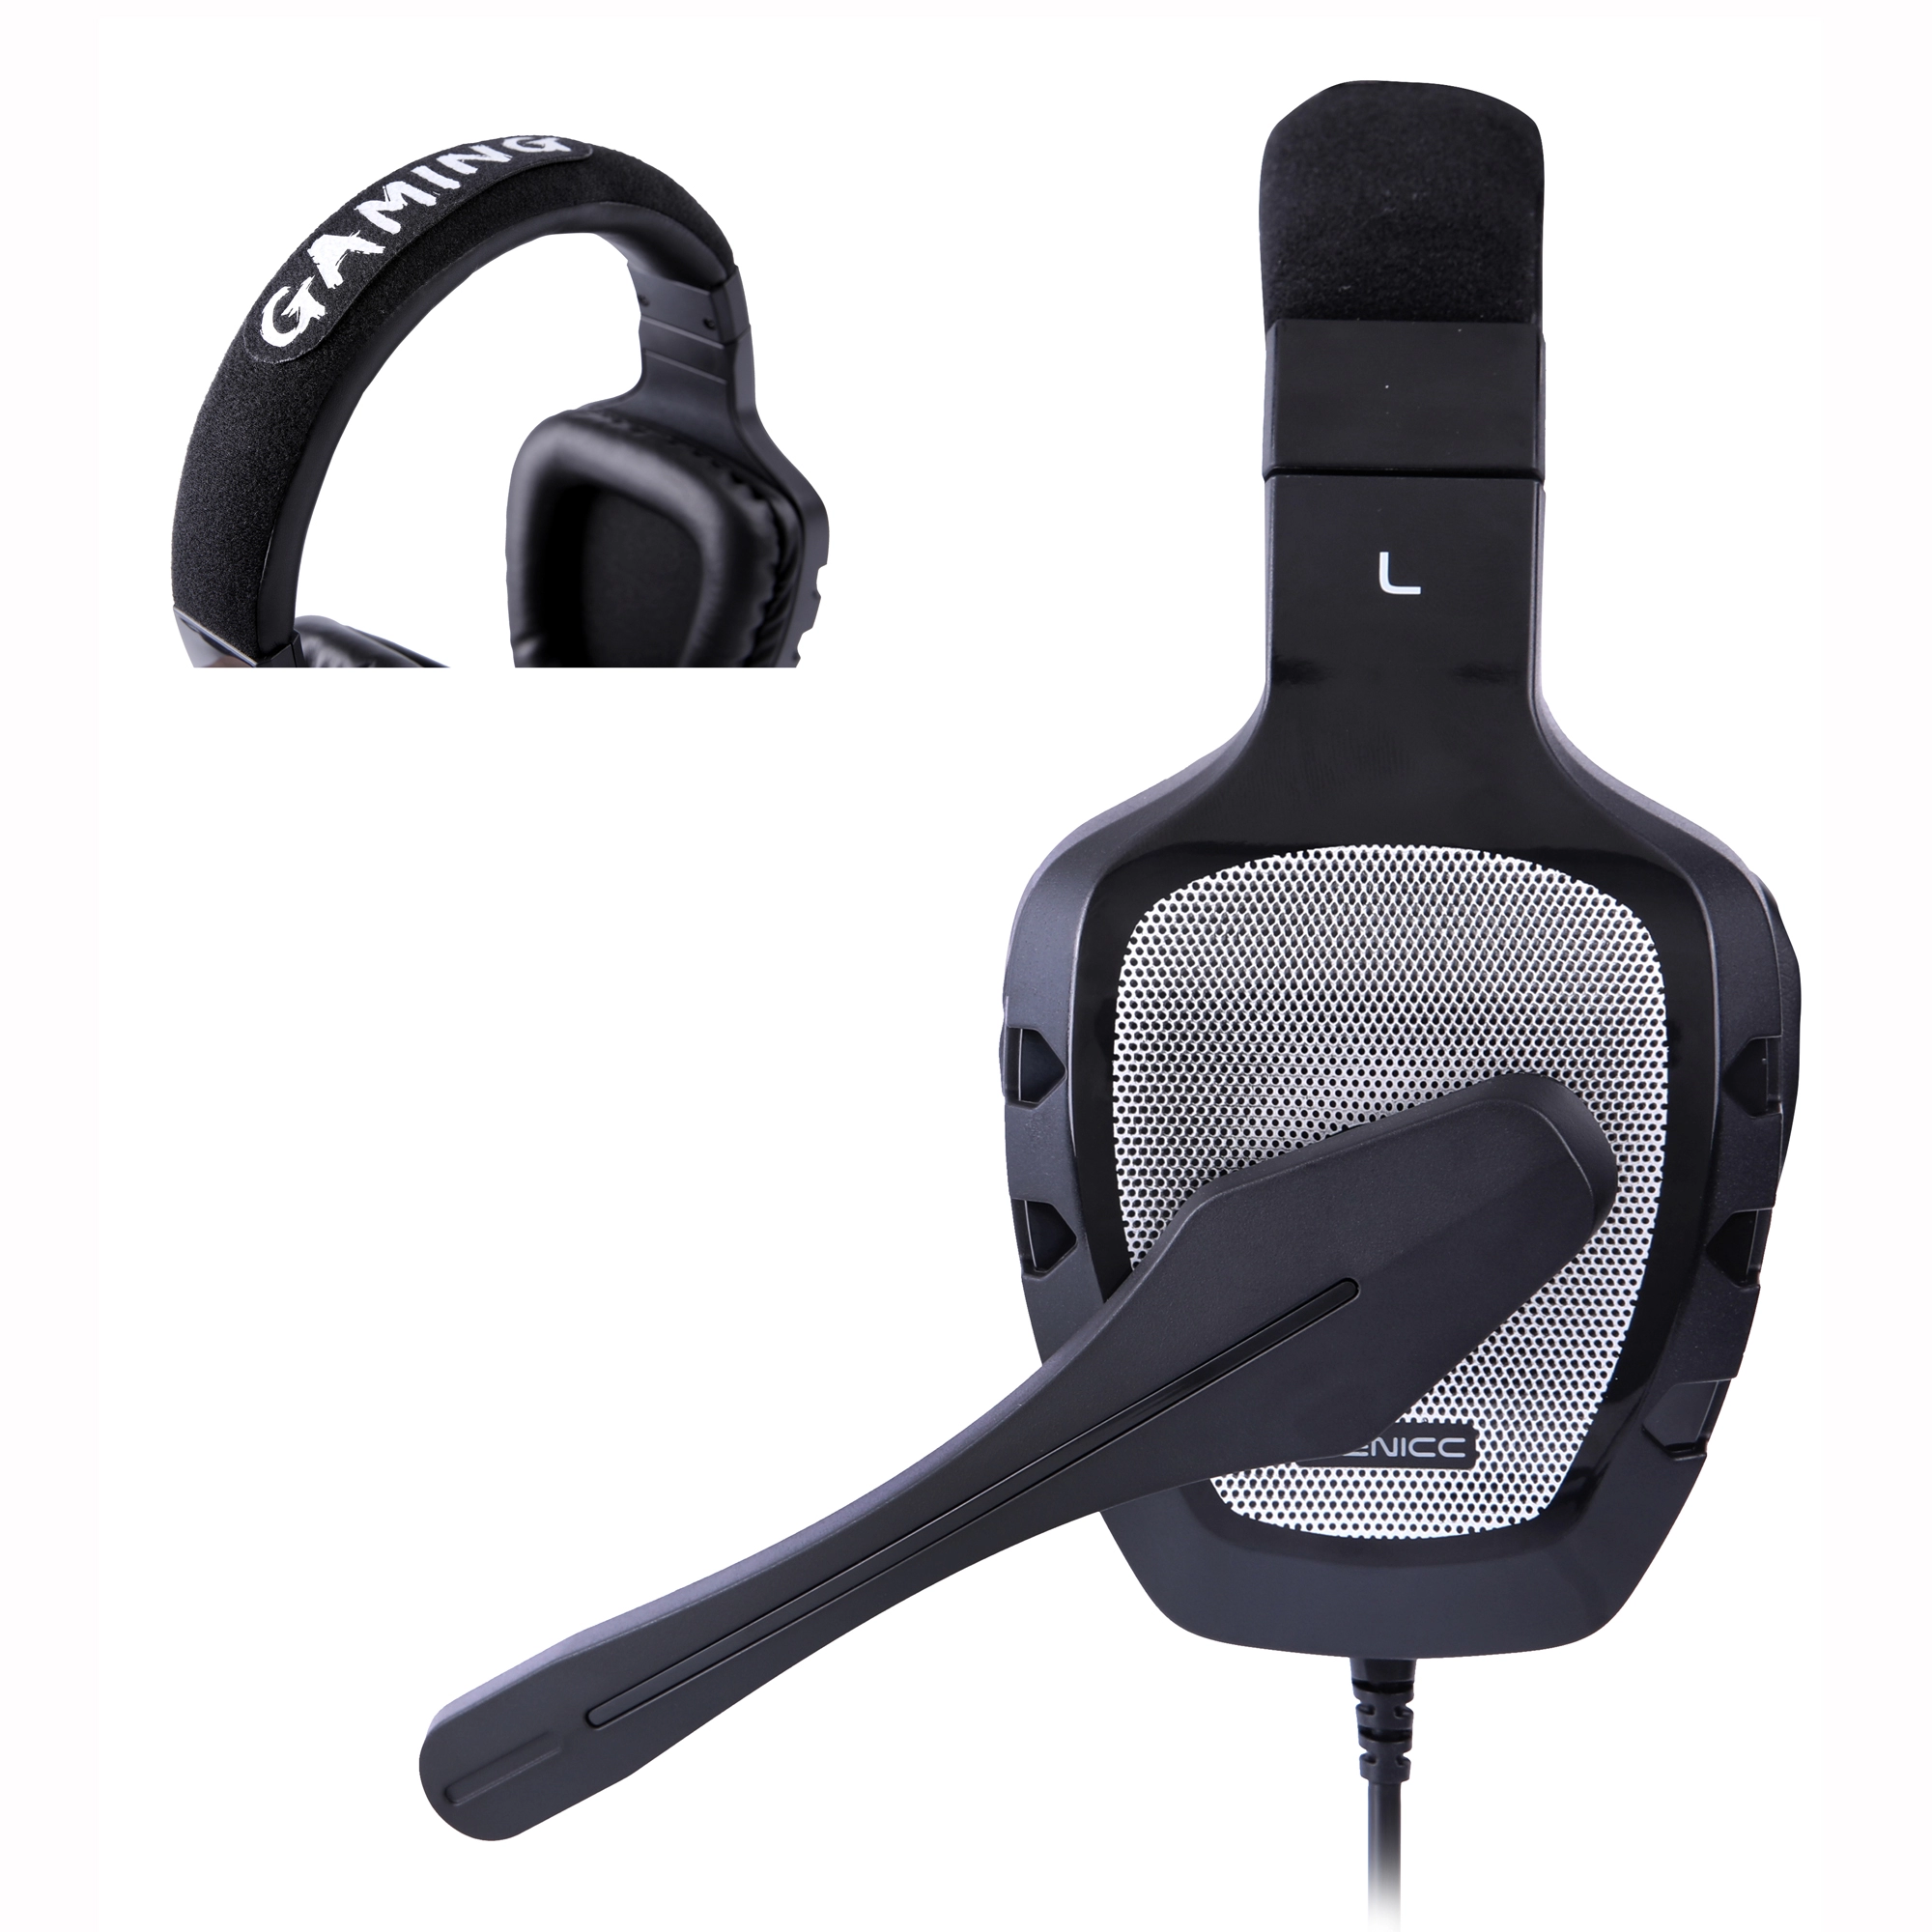 Somic A1 stereo 3.5mm plug gaming wired headset telephone cheap headsets mobile phone accessories earphones headphone